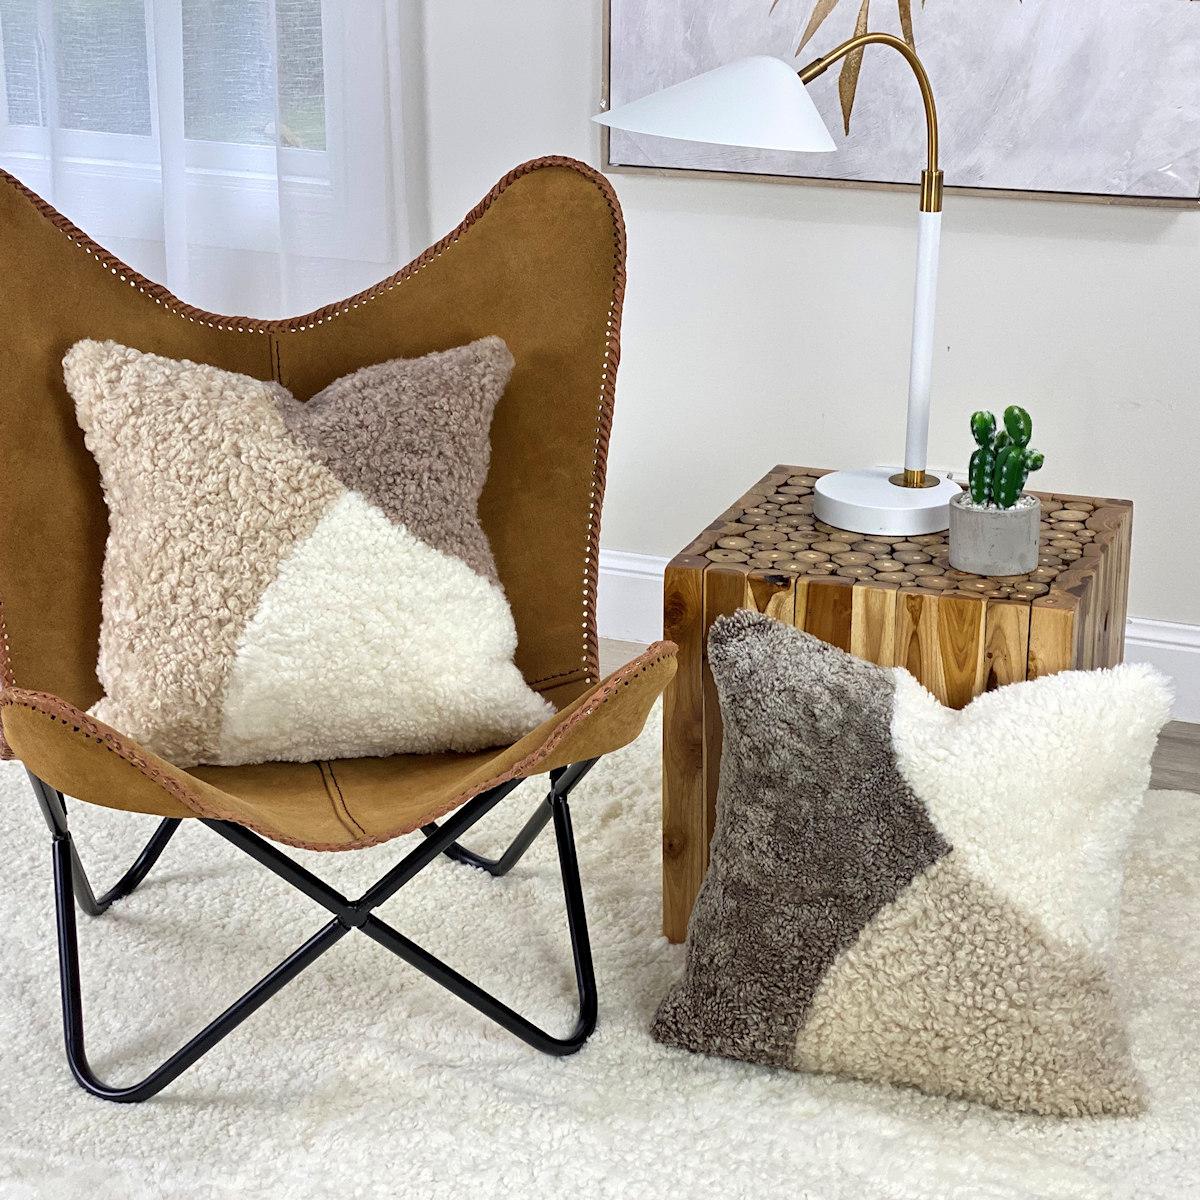 Introduce charming tactile elements found in this natural pebbles, abstract shearling pillow. The boucle pillow features short curly wool that will bring a room to life, translating contemporary design paralleled with comfort and an expression of